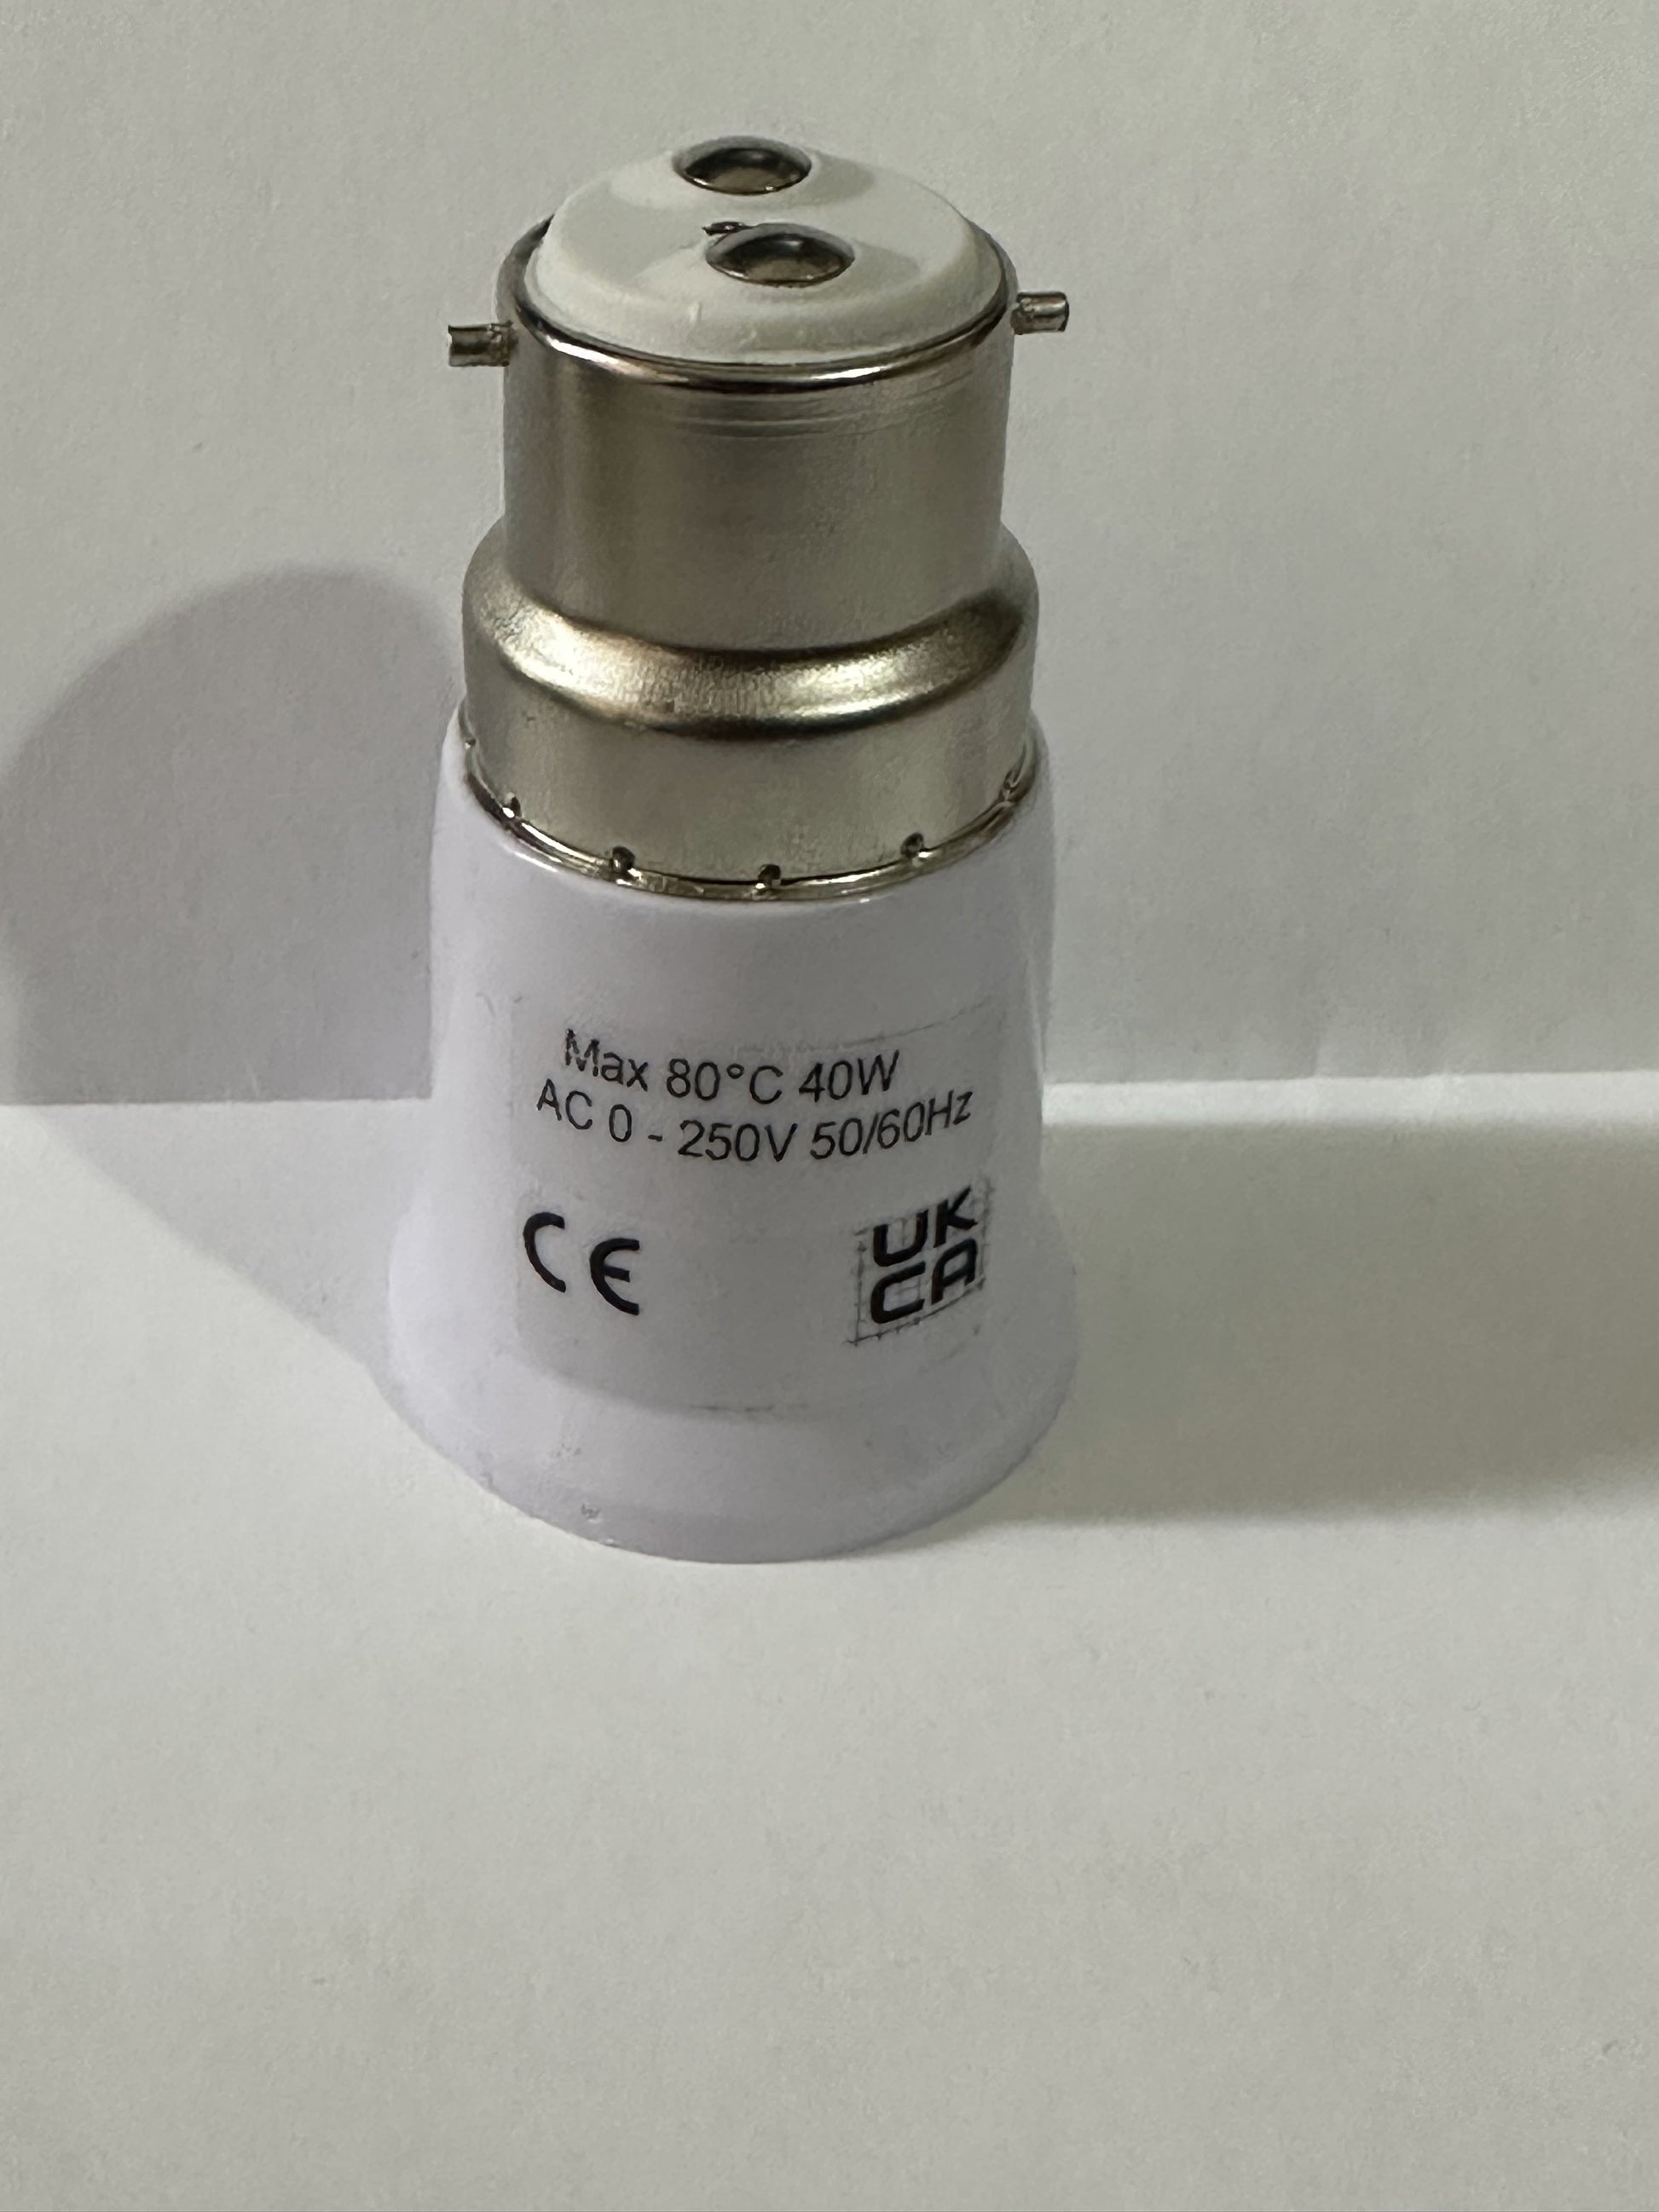 CritchCorp Smart™ V1 E27 to B22 bulb converter. Make your E27 bulb work in a B22 socket - CritchCorp Retail & Wholesale